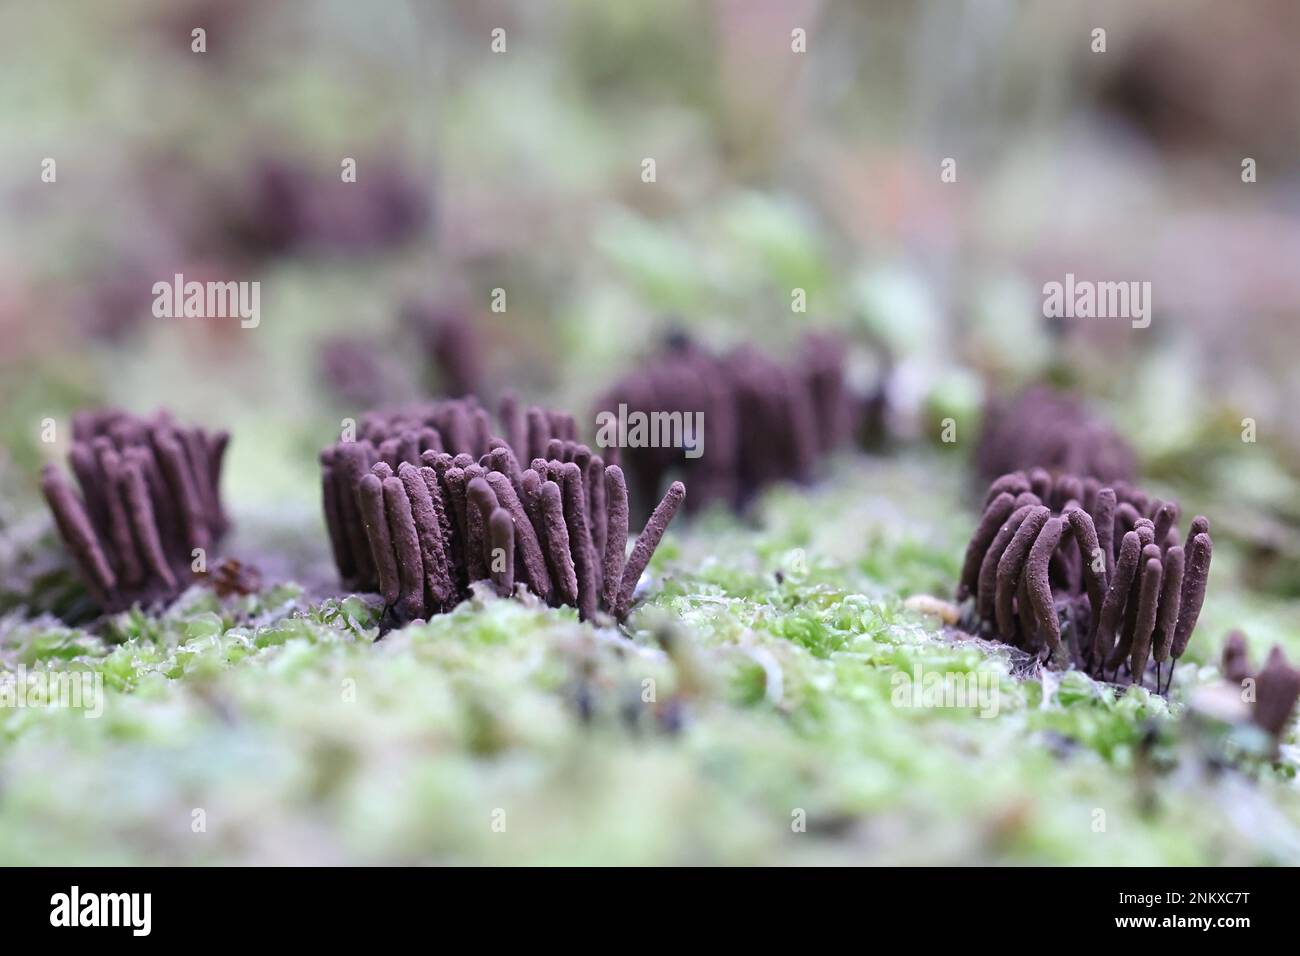 Stemonitis virginiensis, a slime mold from Finland, no common English name Stock Photo